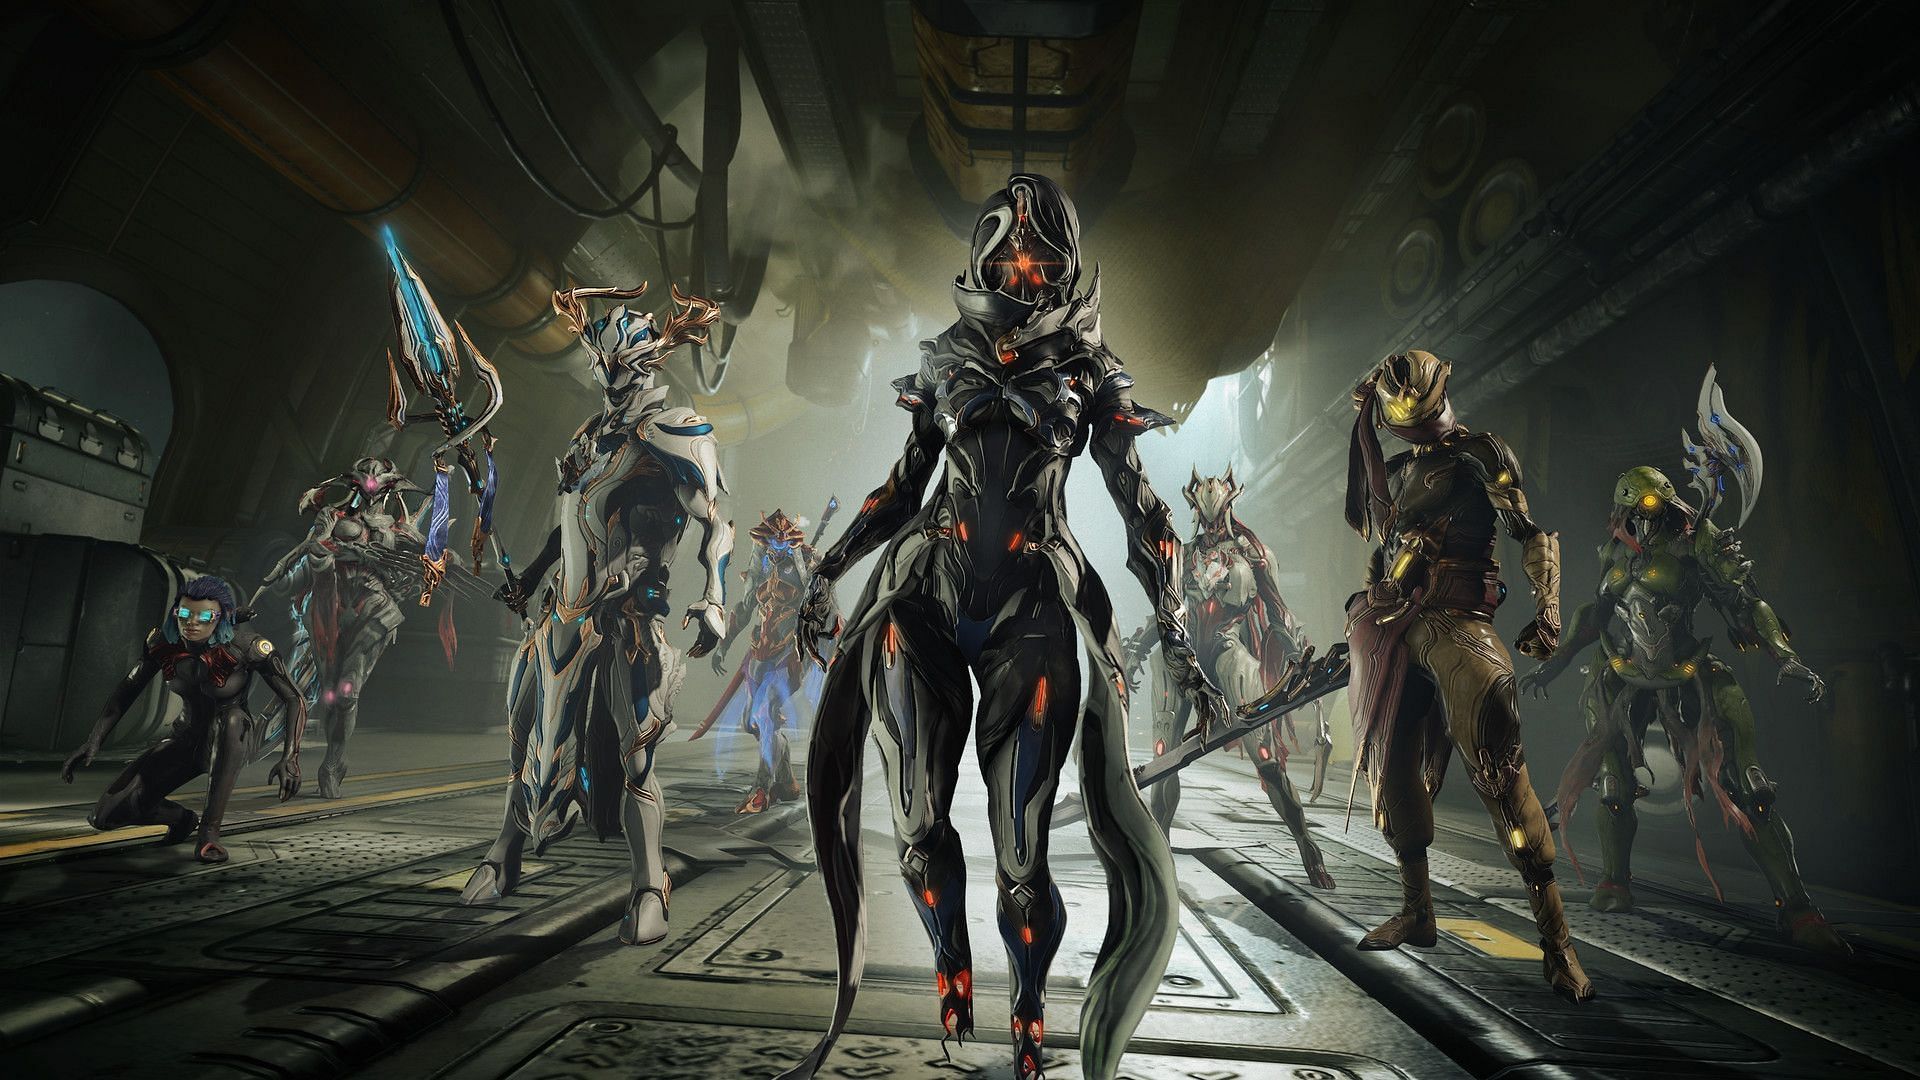 Warframe features more than 50 playable fighters in the game (Image via Digital Extremes)